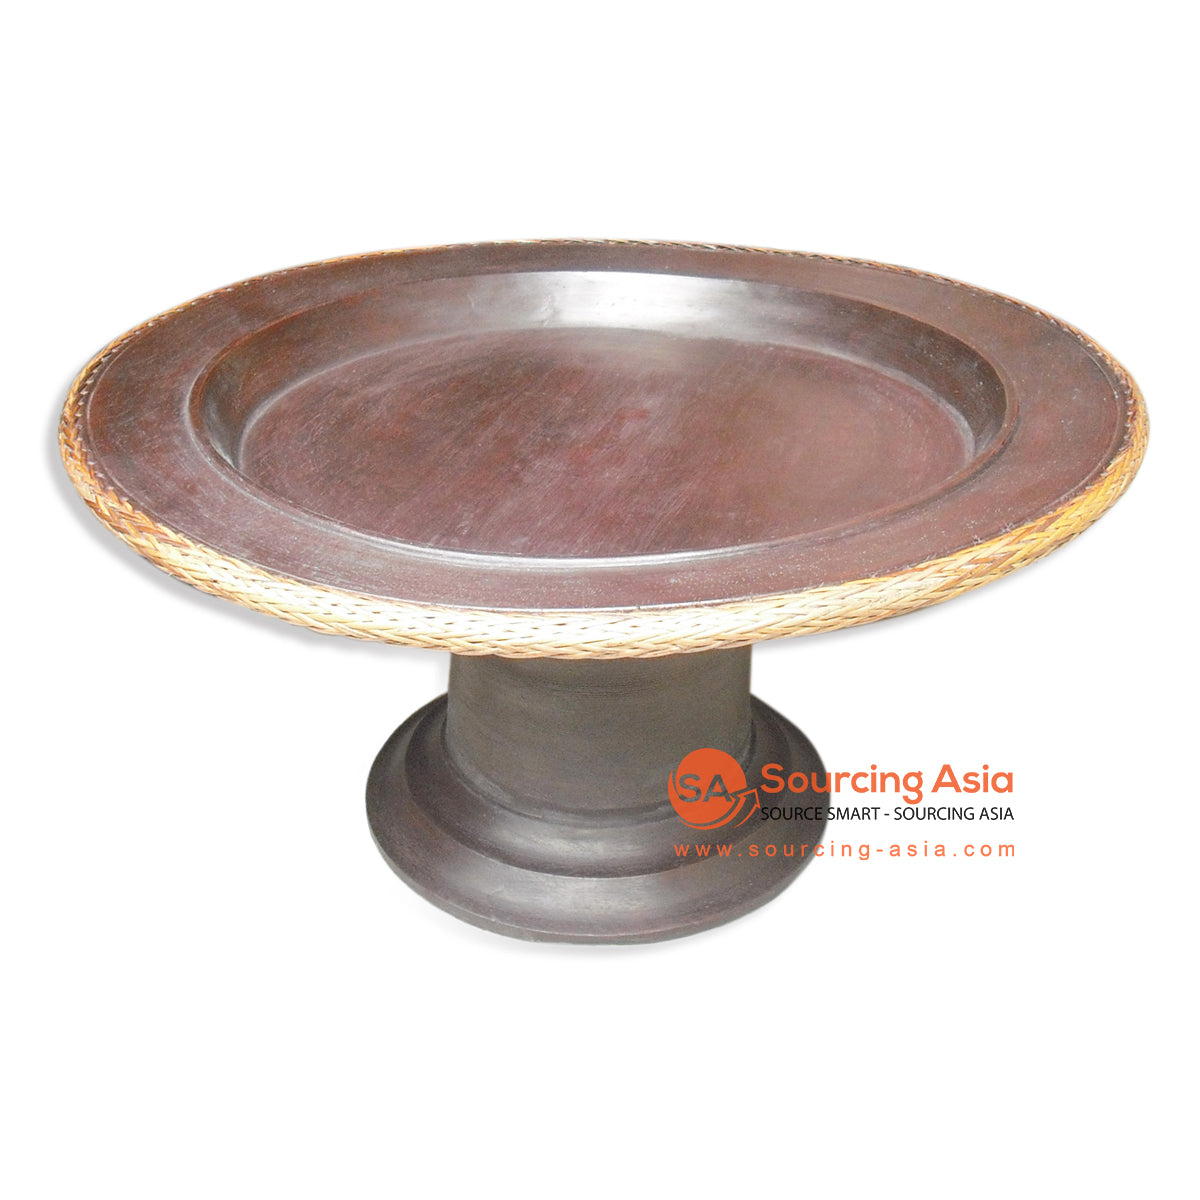 PPN011 BROWN WOODEN DULANG OFFERING TRAY